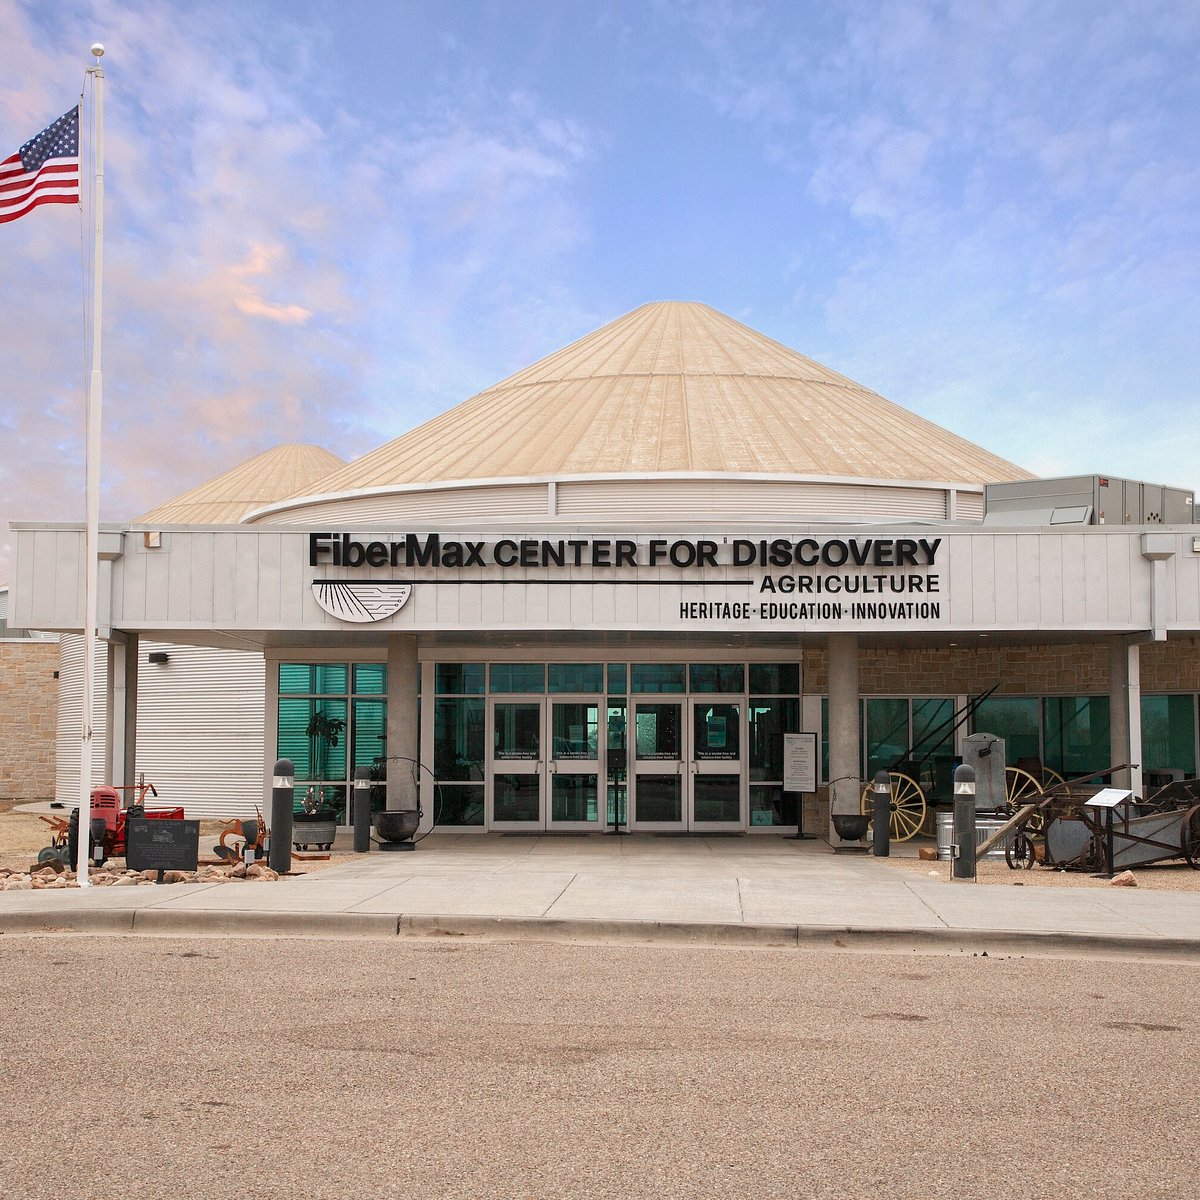 FiberMax Center for Discovery